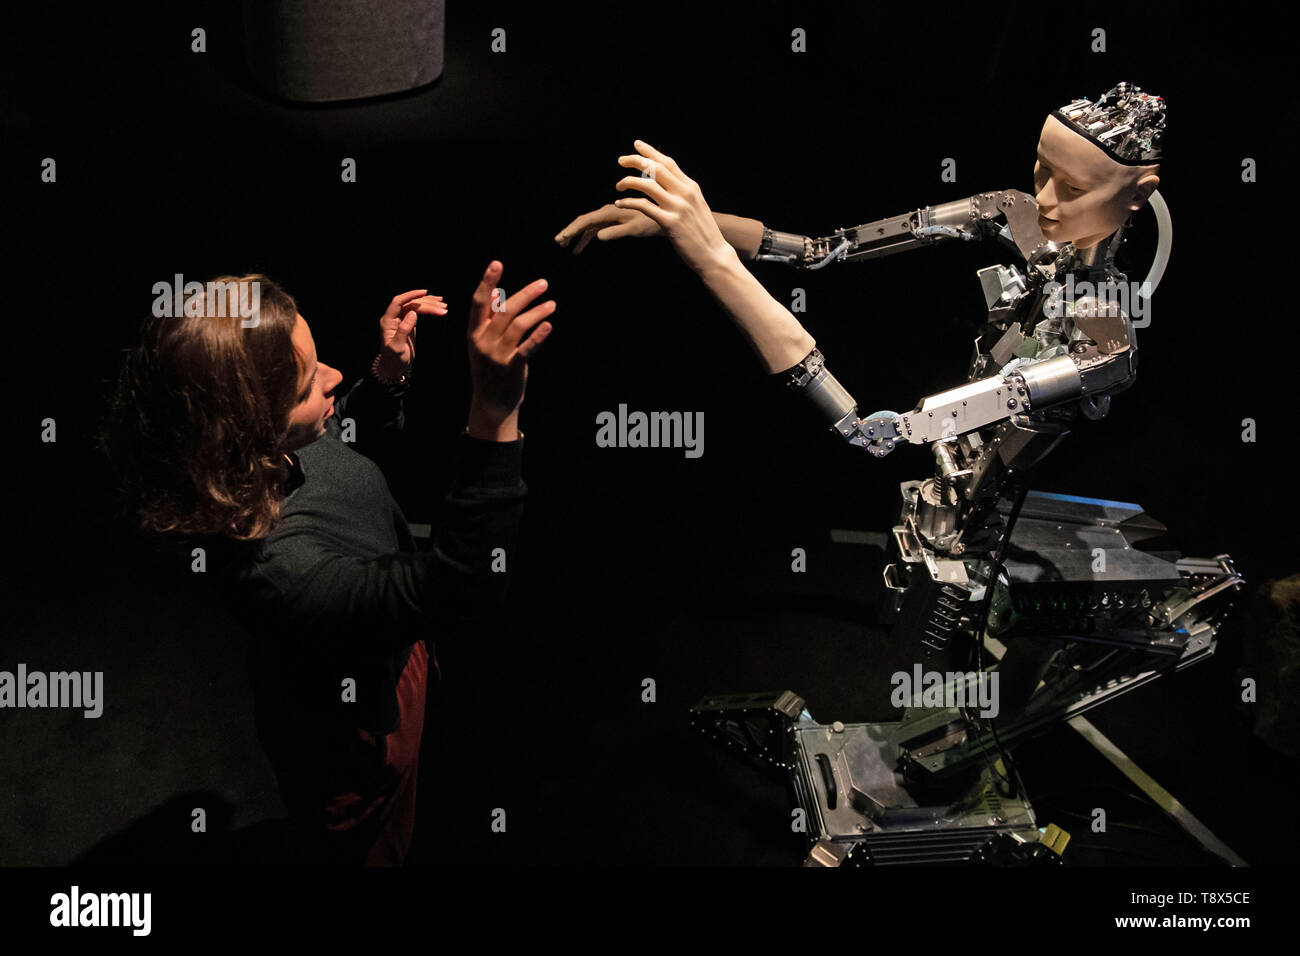 A women interacts with 'Alter', a machine body with a human like face and hands who learns through interplaying with the surrounding world. Alter was created by roboticist Hiroshi Ishiguro and is on display at the 'AI: More Than Human' exhibition at the Barbican Centre in London. The major new exhibition explores the relationship between humans and artificial intelligence. Stock Photo